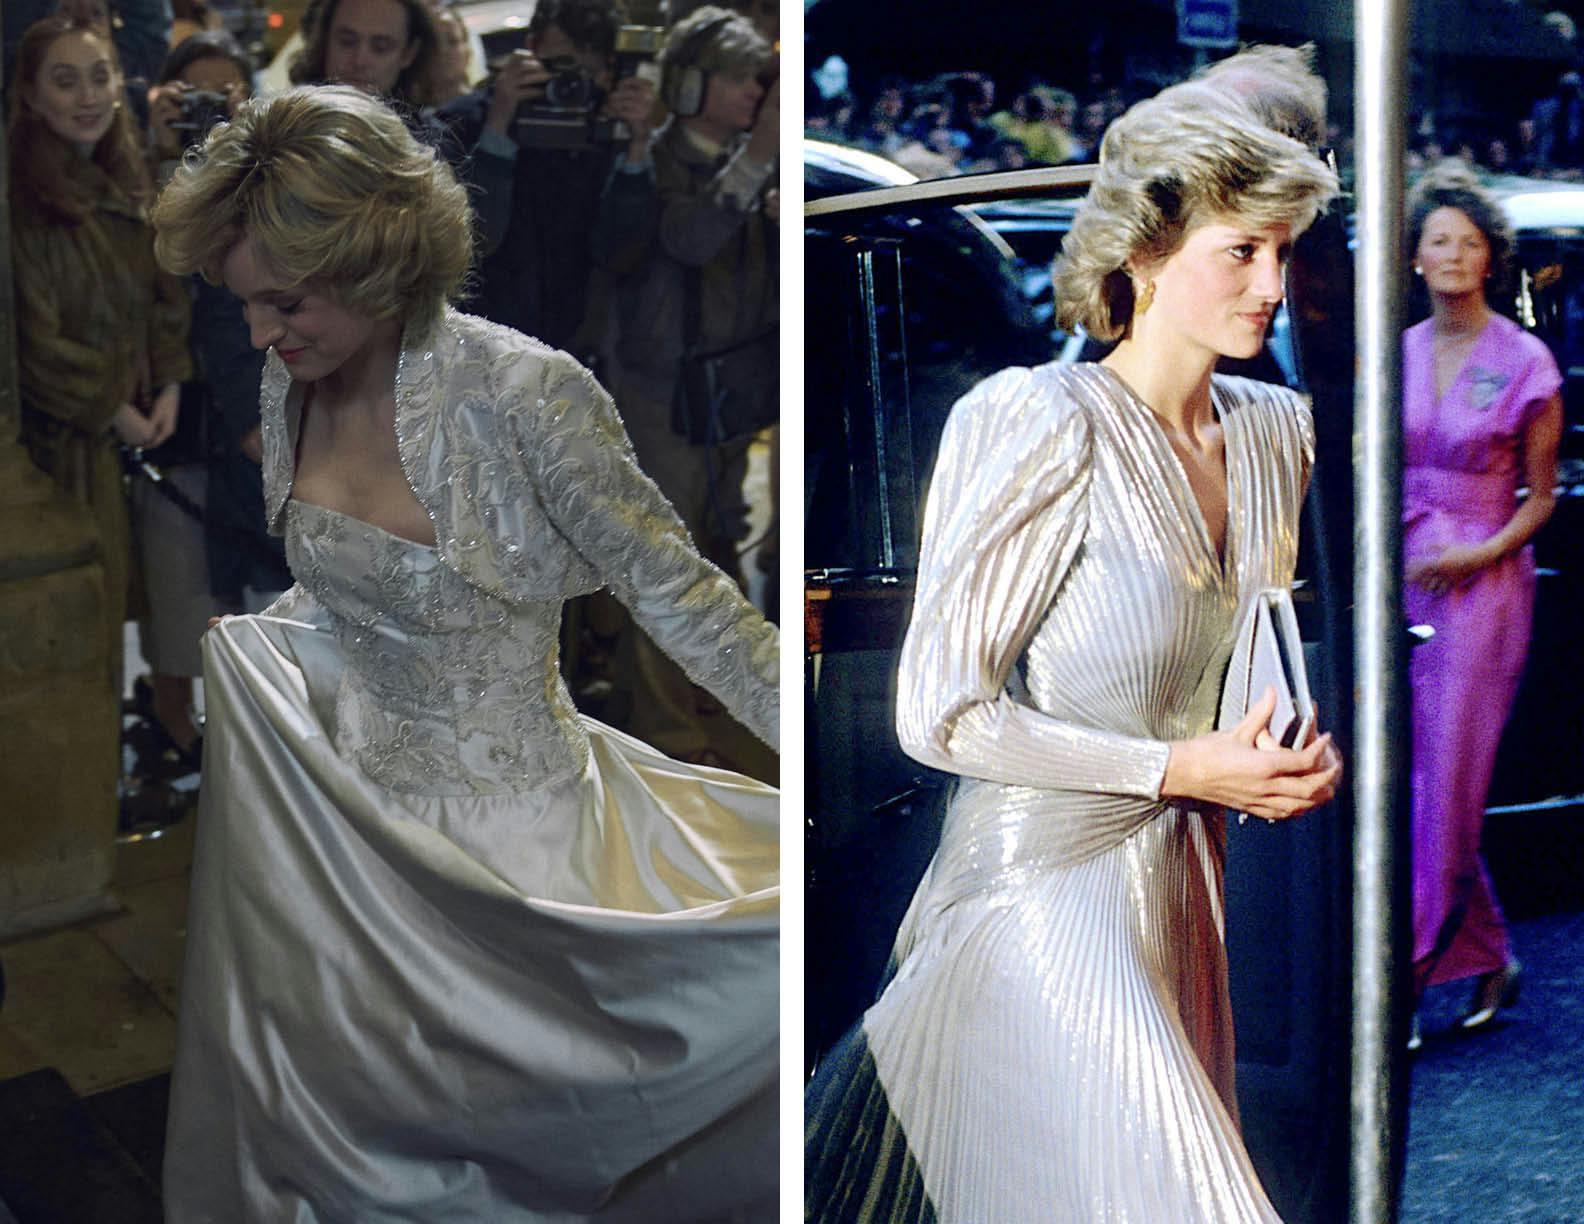 Is Princess Diana's wedding dress designed by David and Elizabeth Emanuel  considered a work of art? - Quora